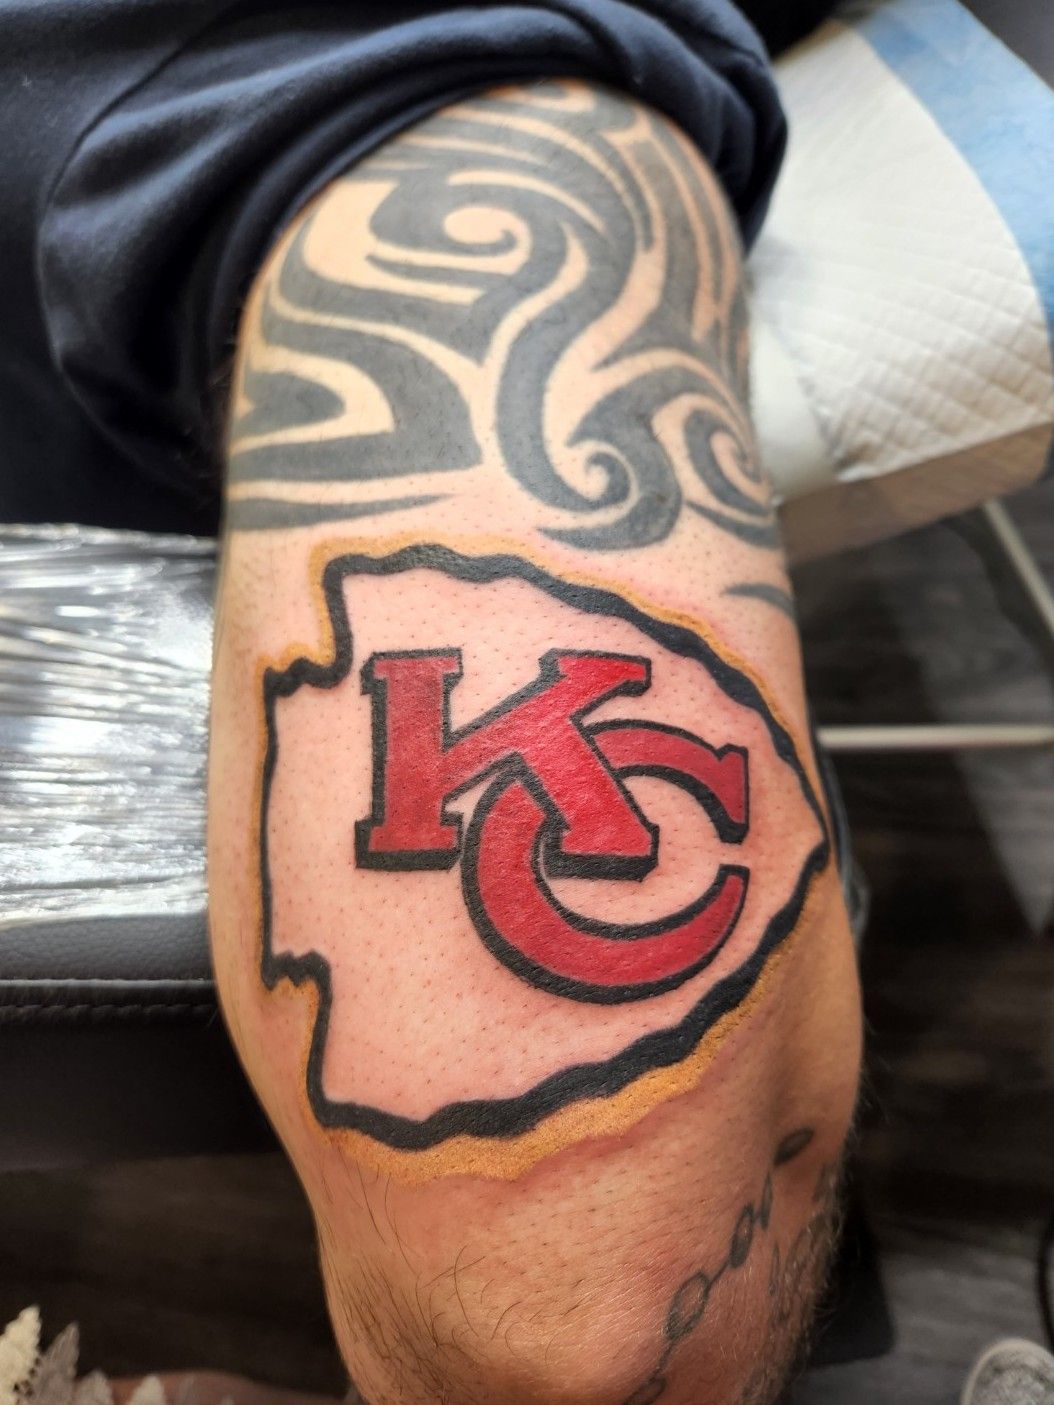 Kansas City Chiefs Fans  Show off your Chiefs tattoo in the comments below    Facebook